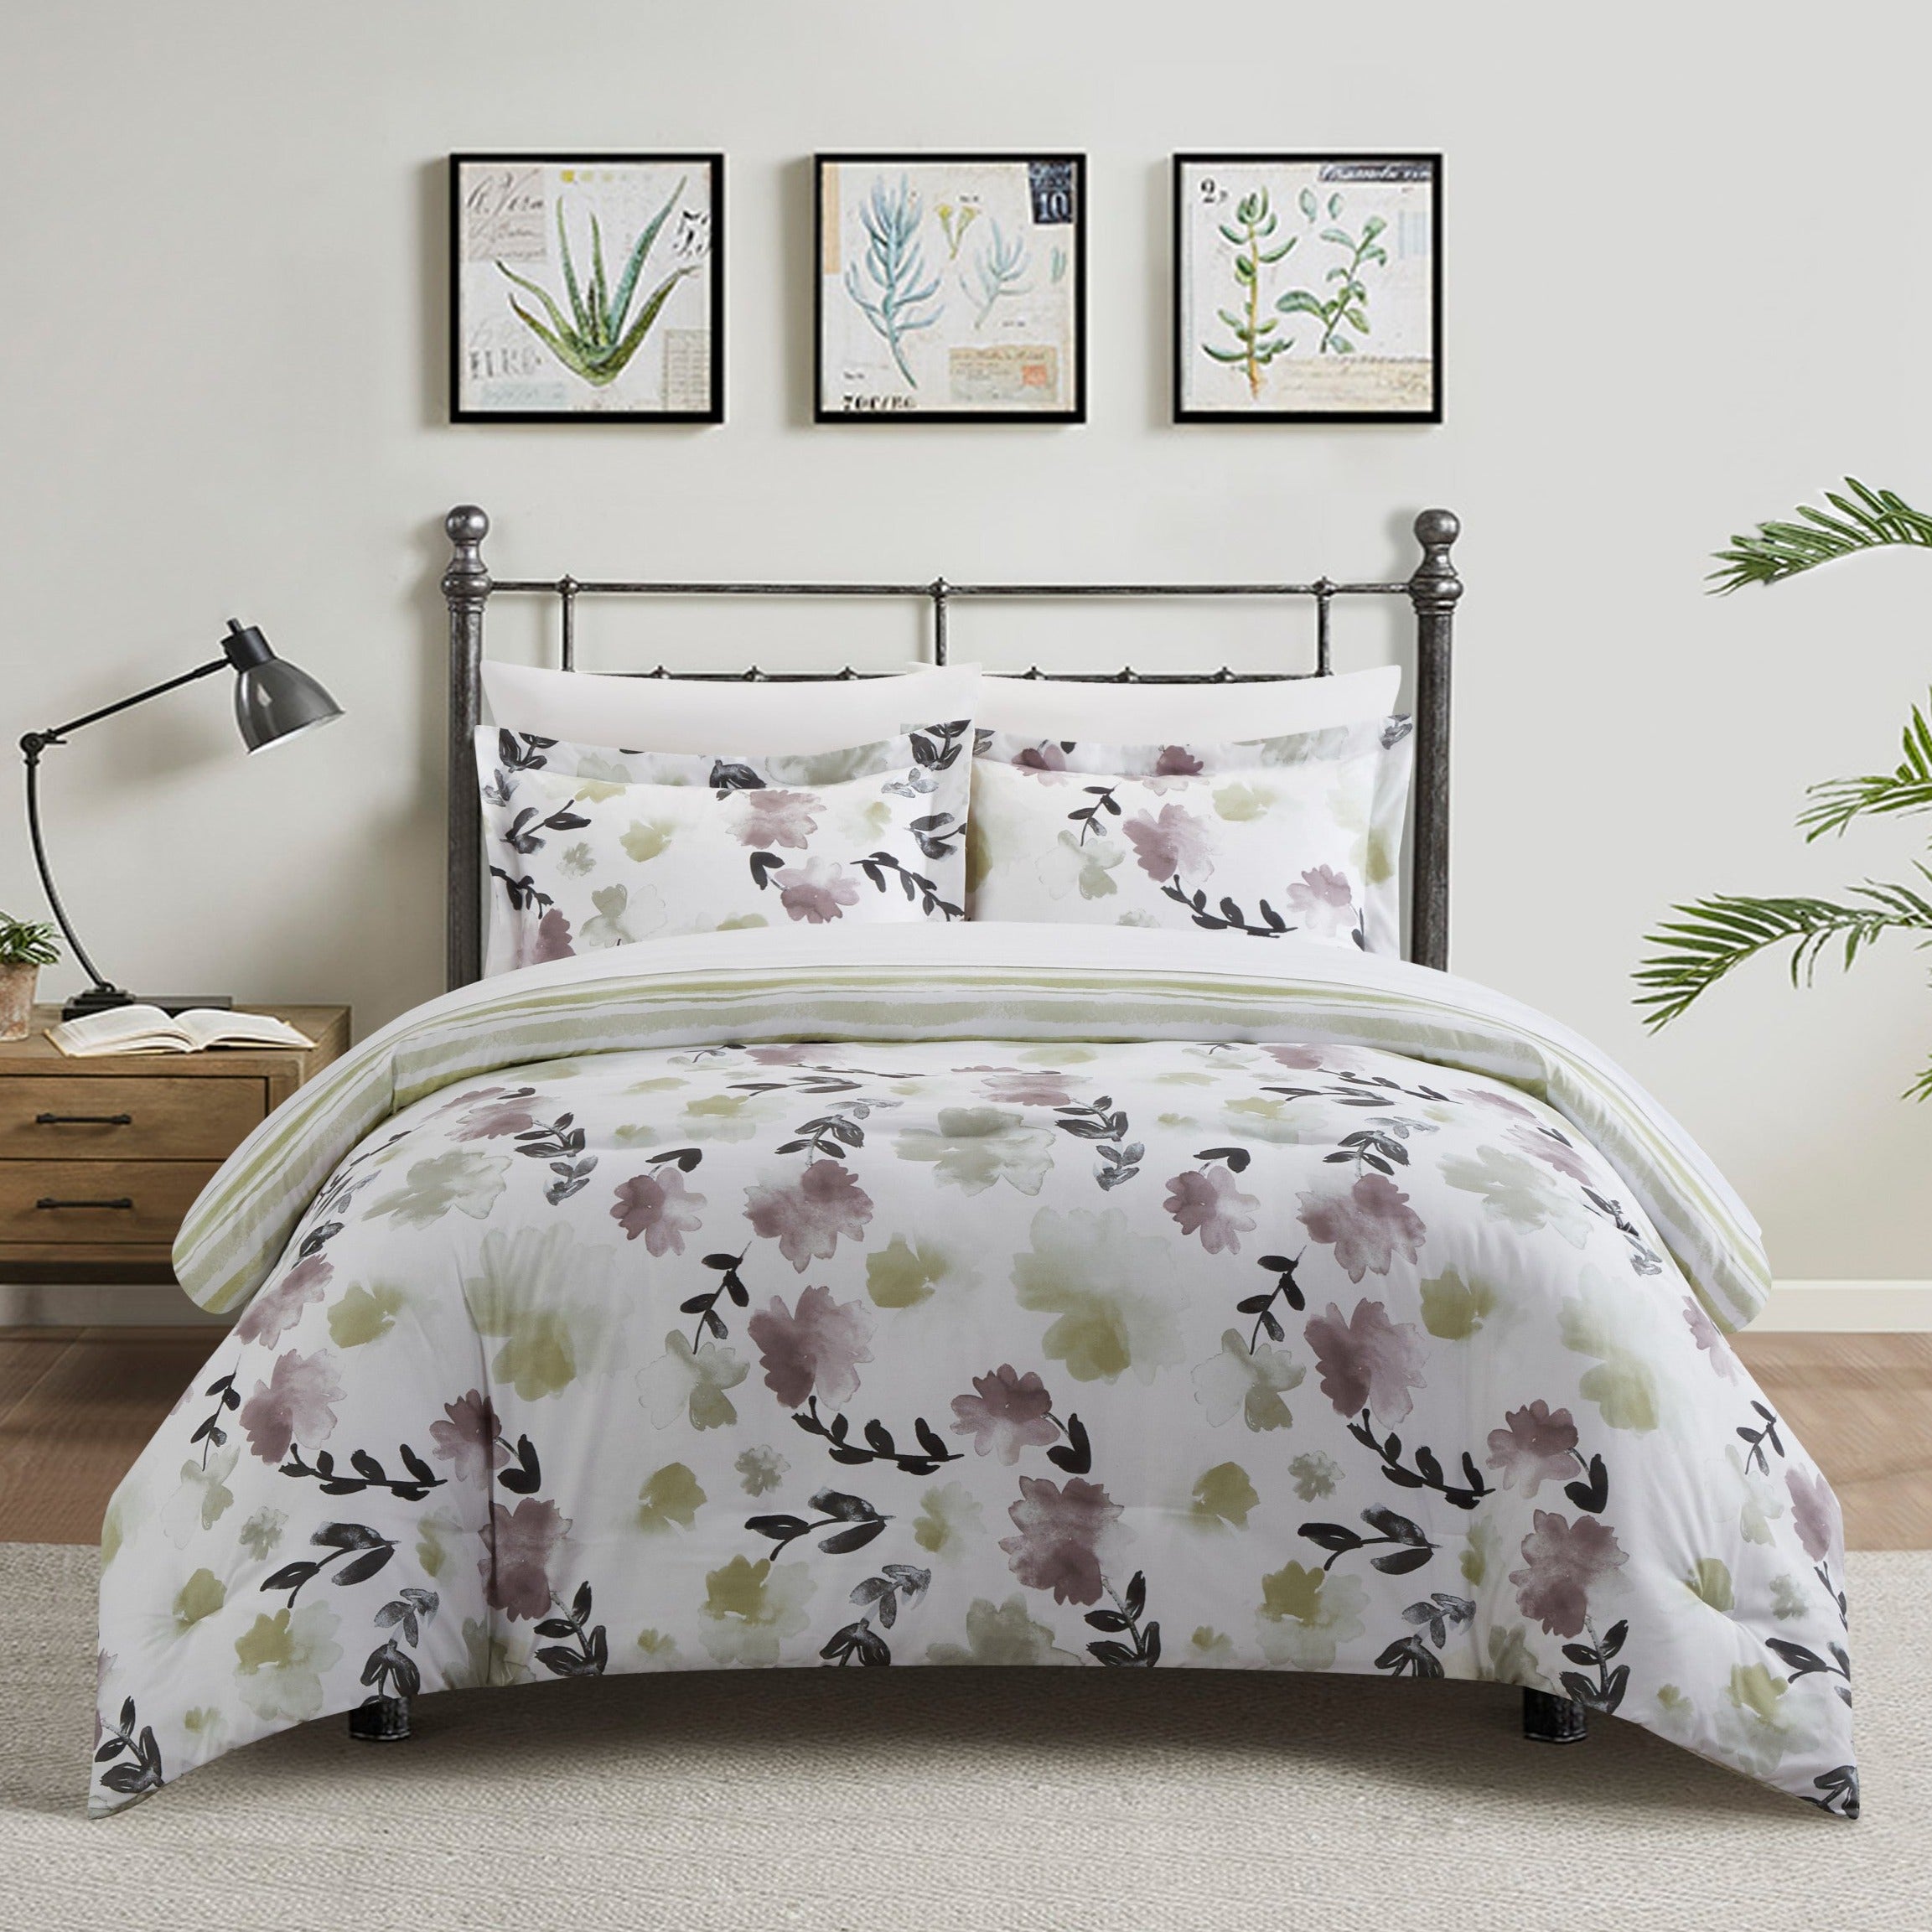 Everly Green 7 Piece Reversible Watercolor Floral Print Duvet Cover Set